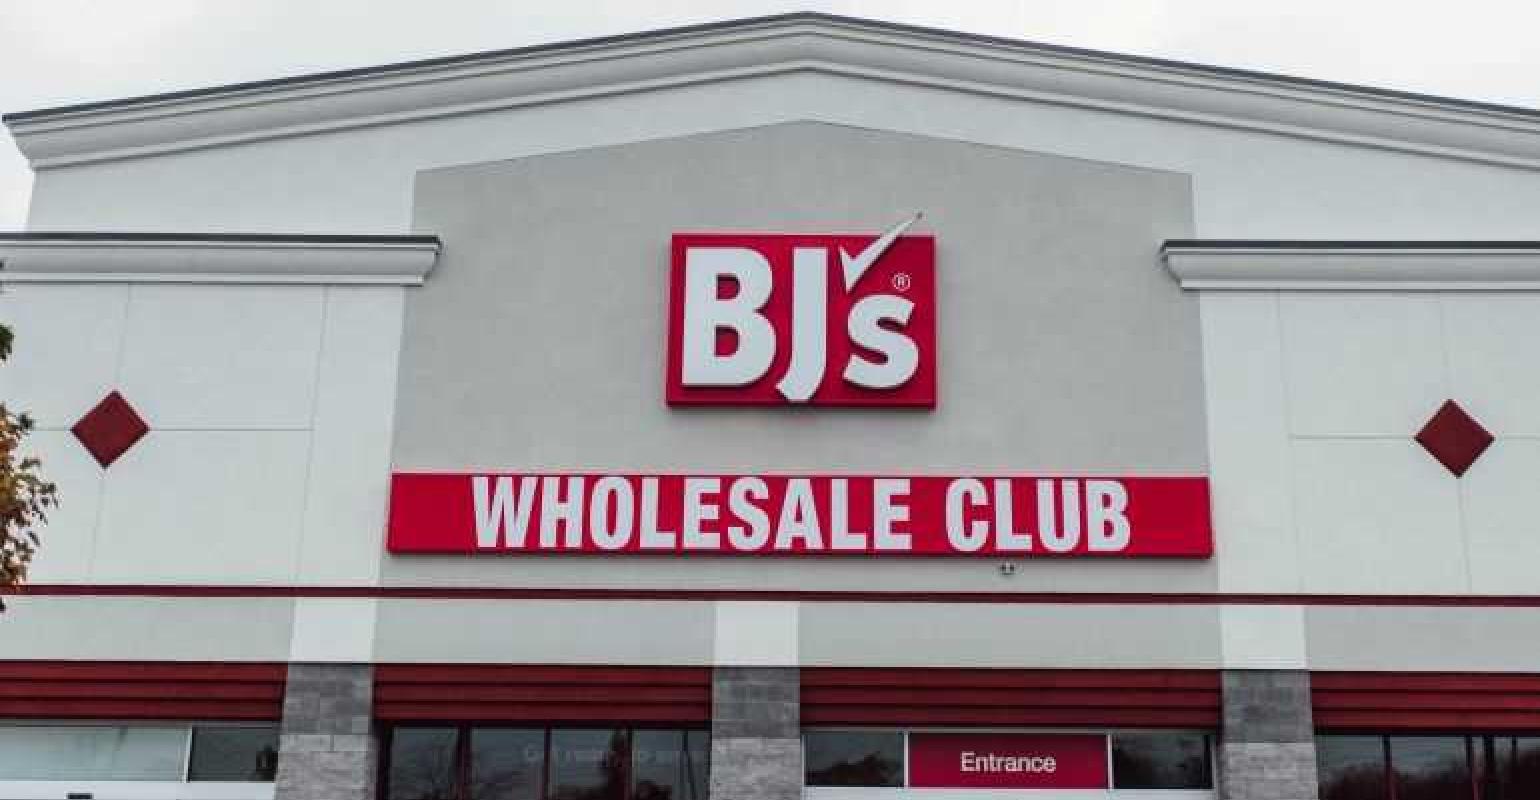 Sales inch up in Q3 at BJ's Wholesale Club | Supermarket News